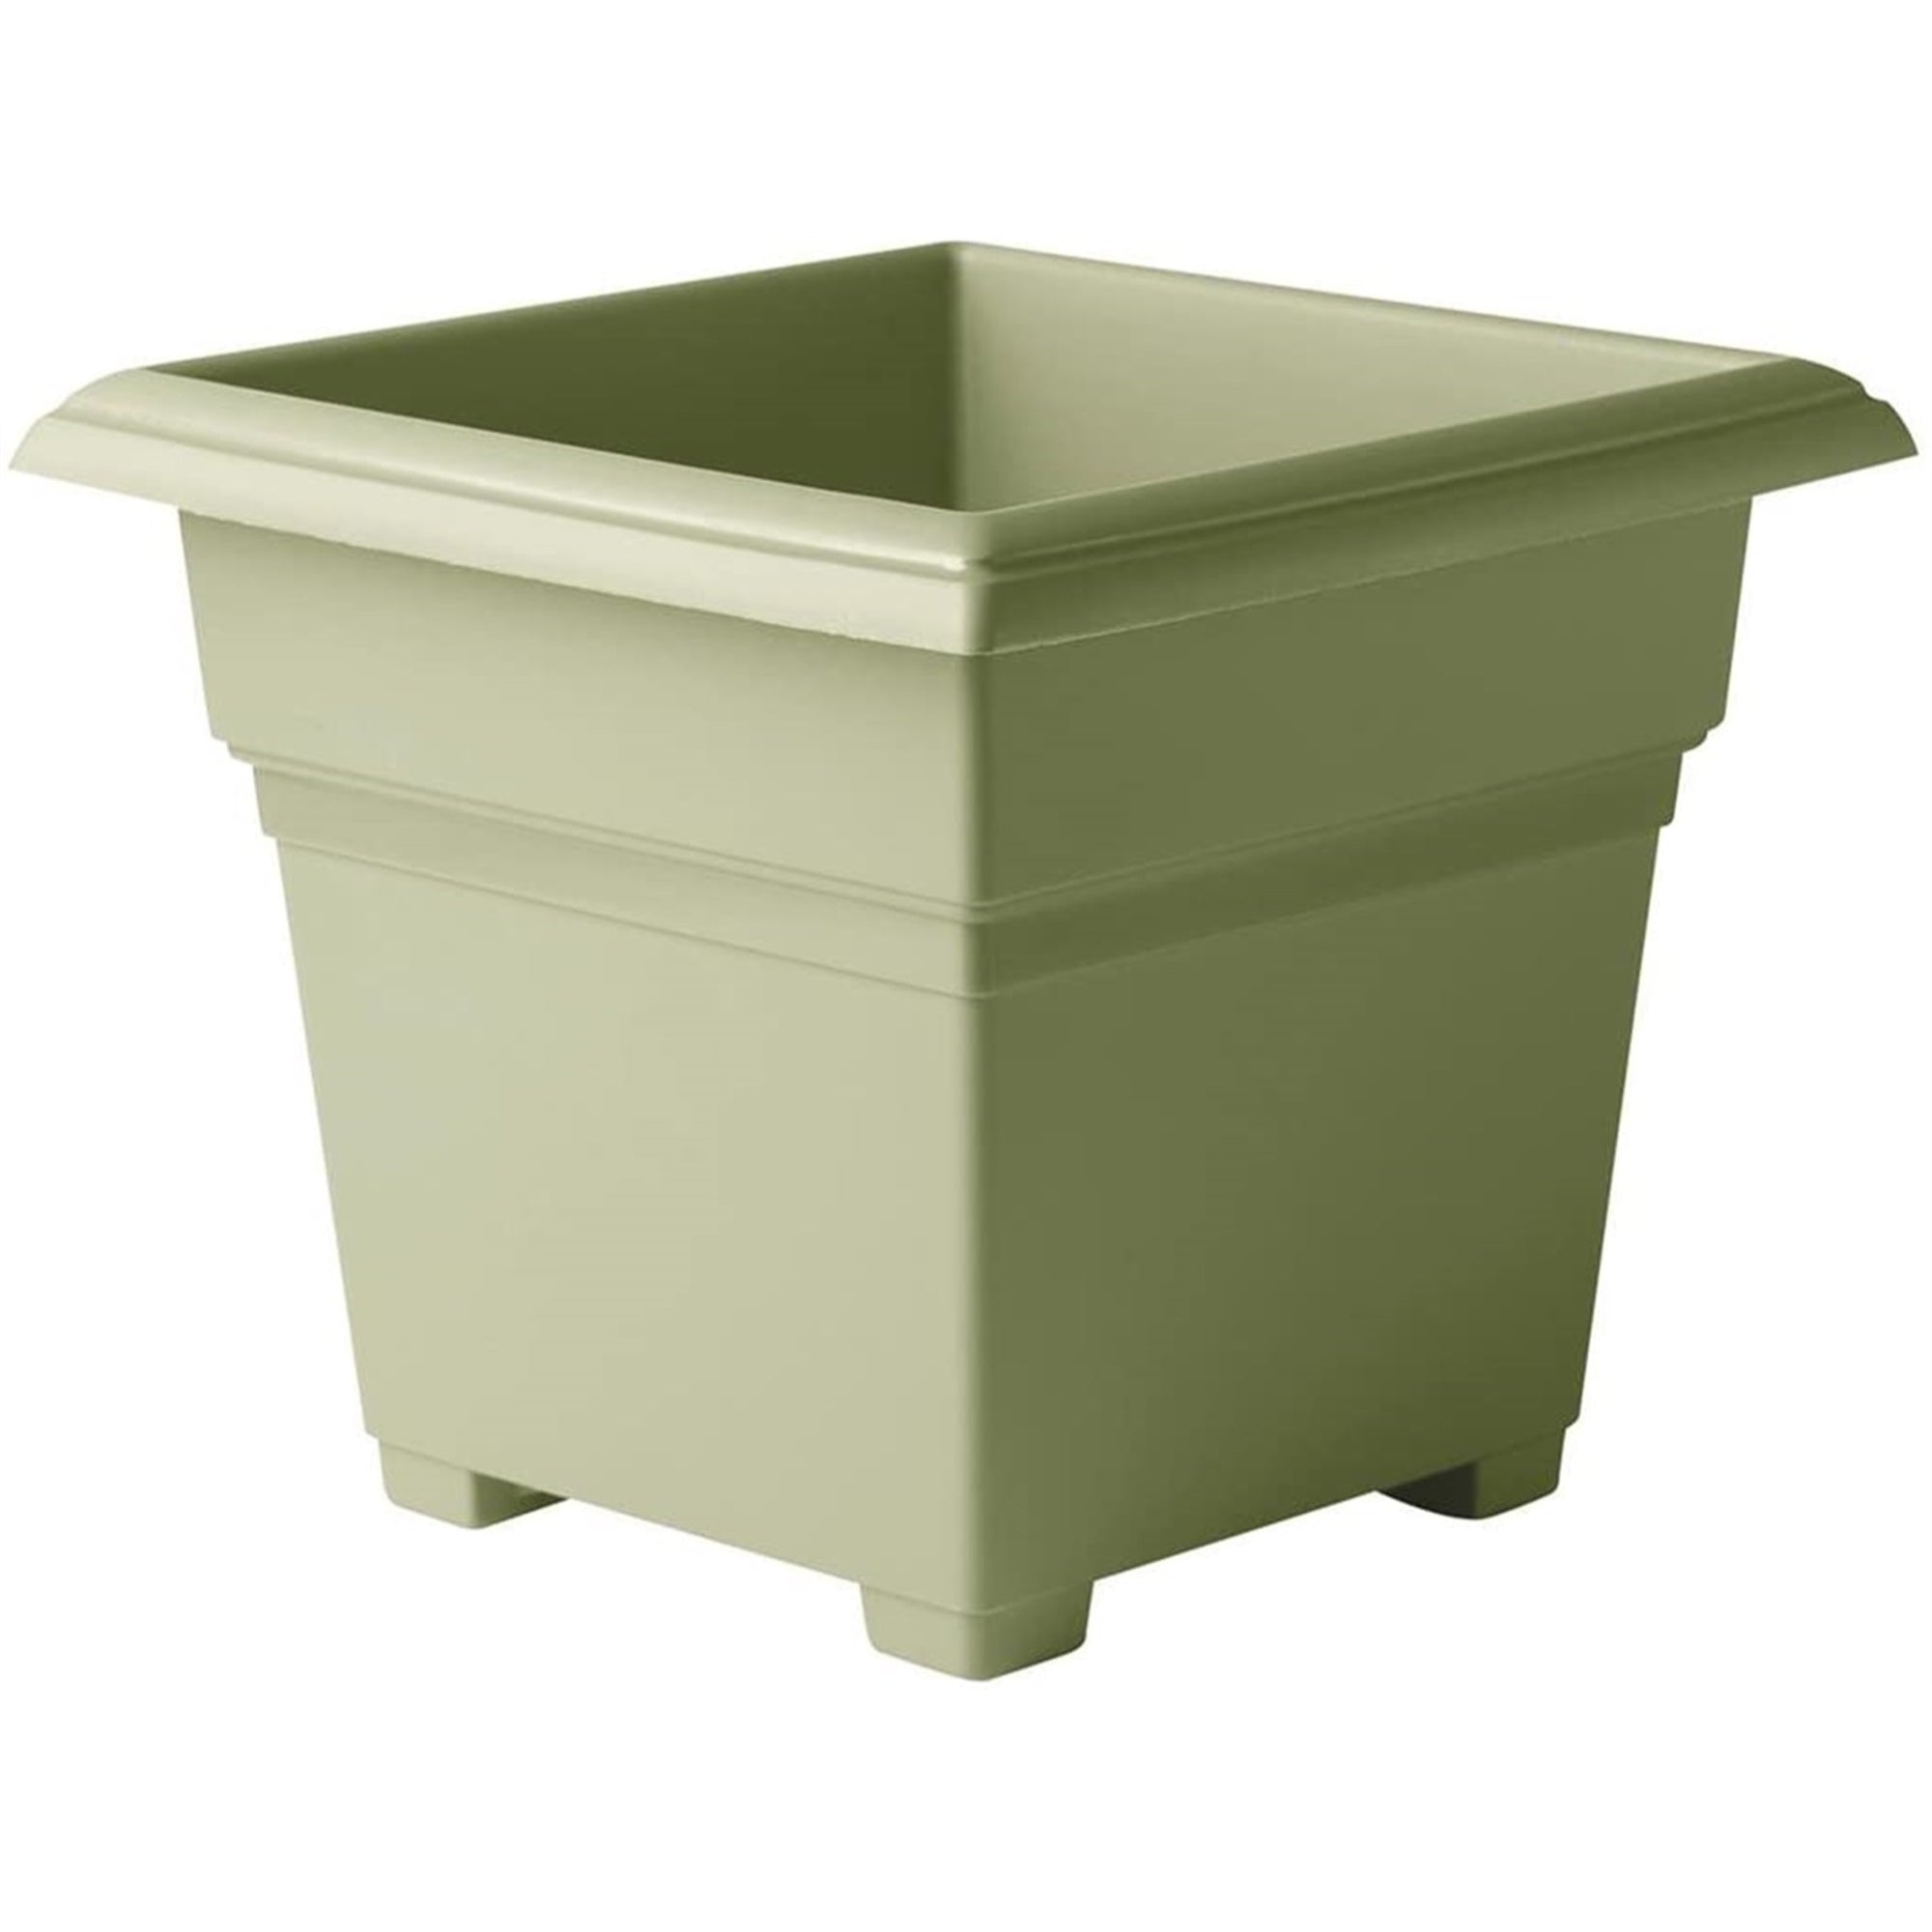 Novelty Countryside Square Tub Planter, Sage 18"